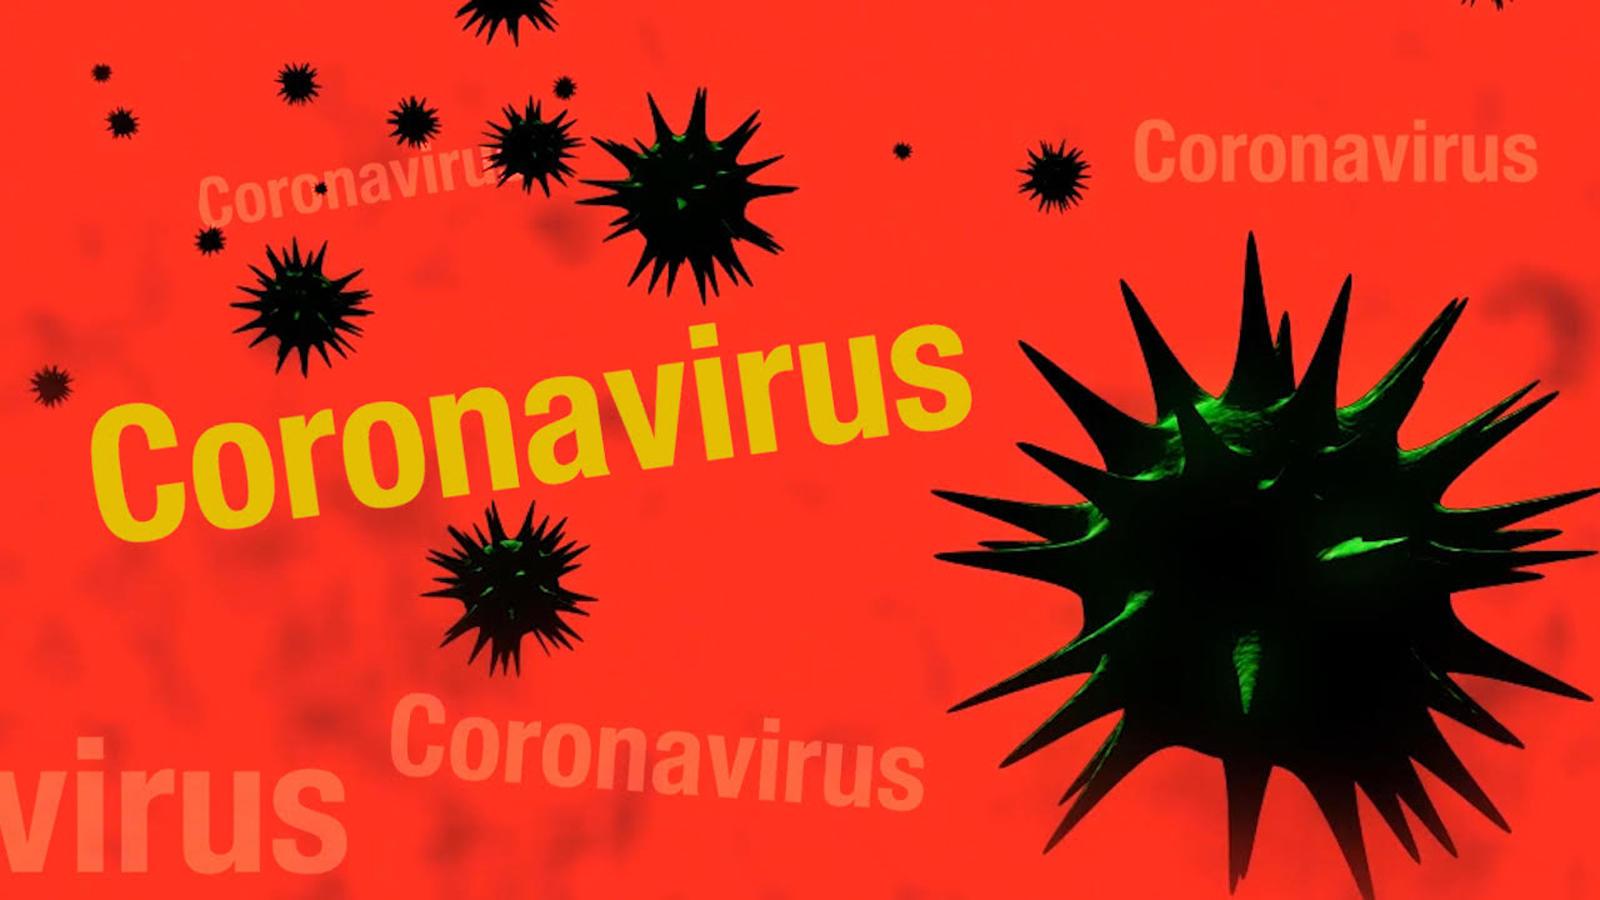 Coronavirus outbreak: What you should know about the infection